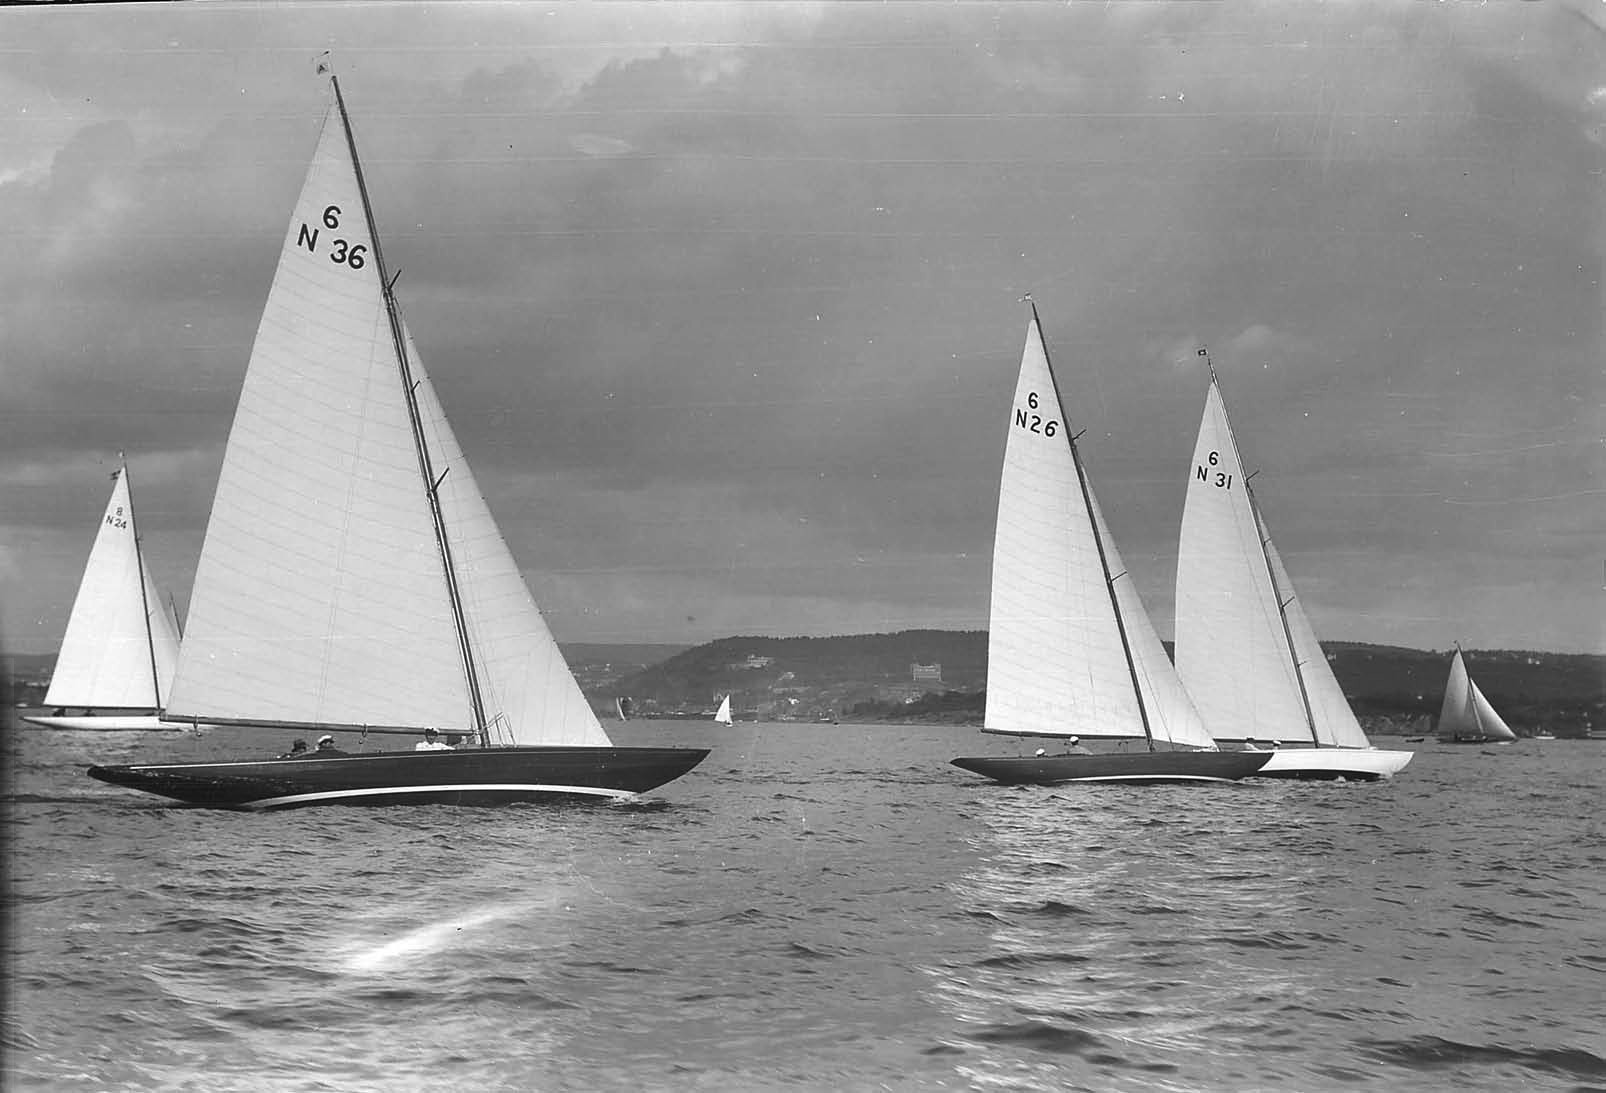 Black and white photo of a group of yachts with white sails sailing